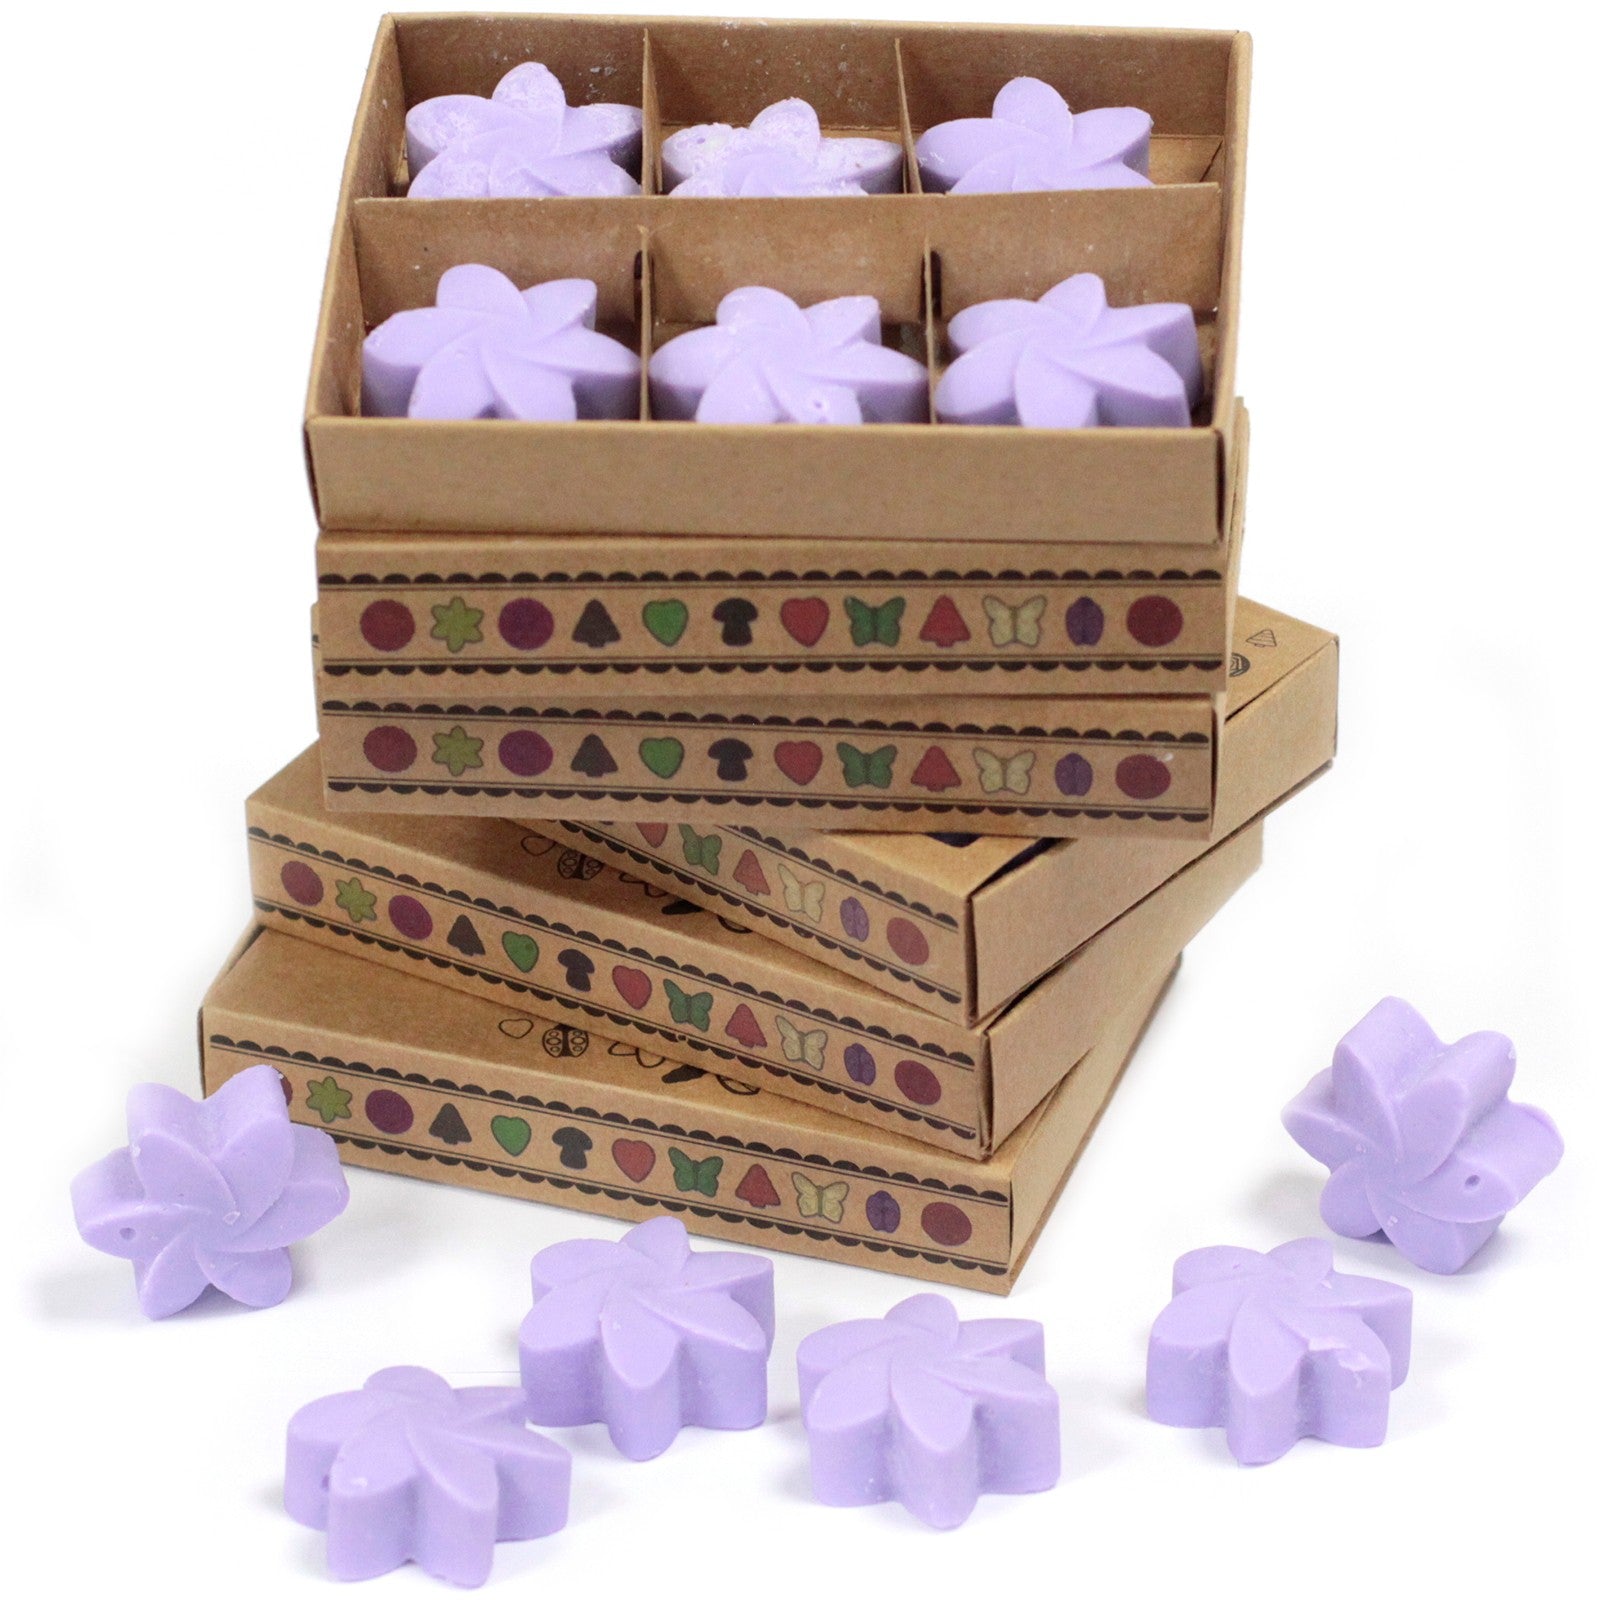 View Box of 6 Wax Melts Lavender Fields information